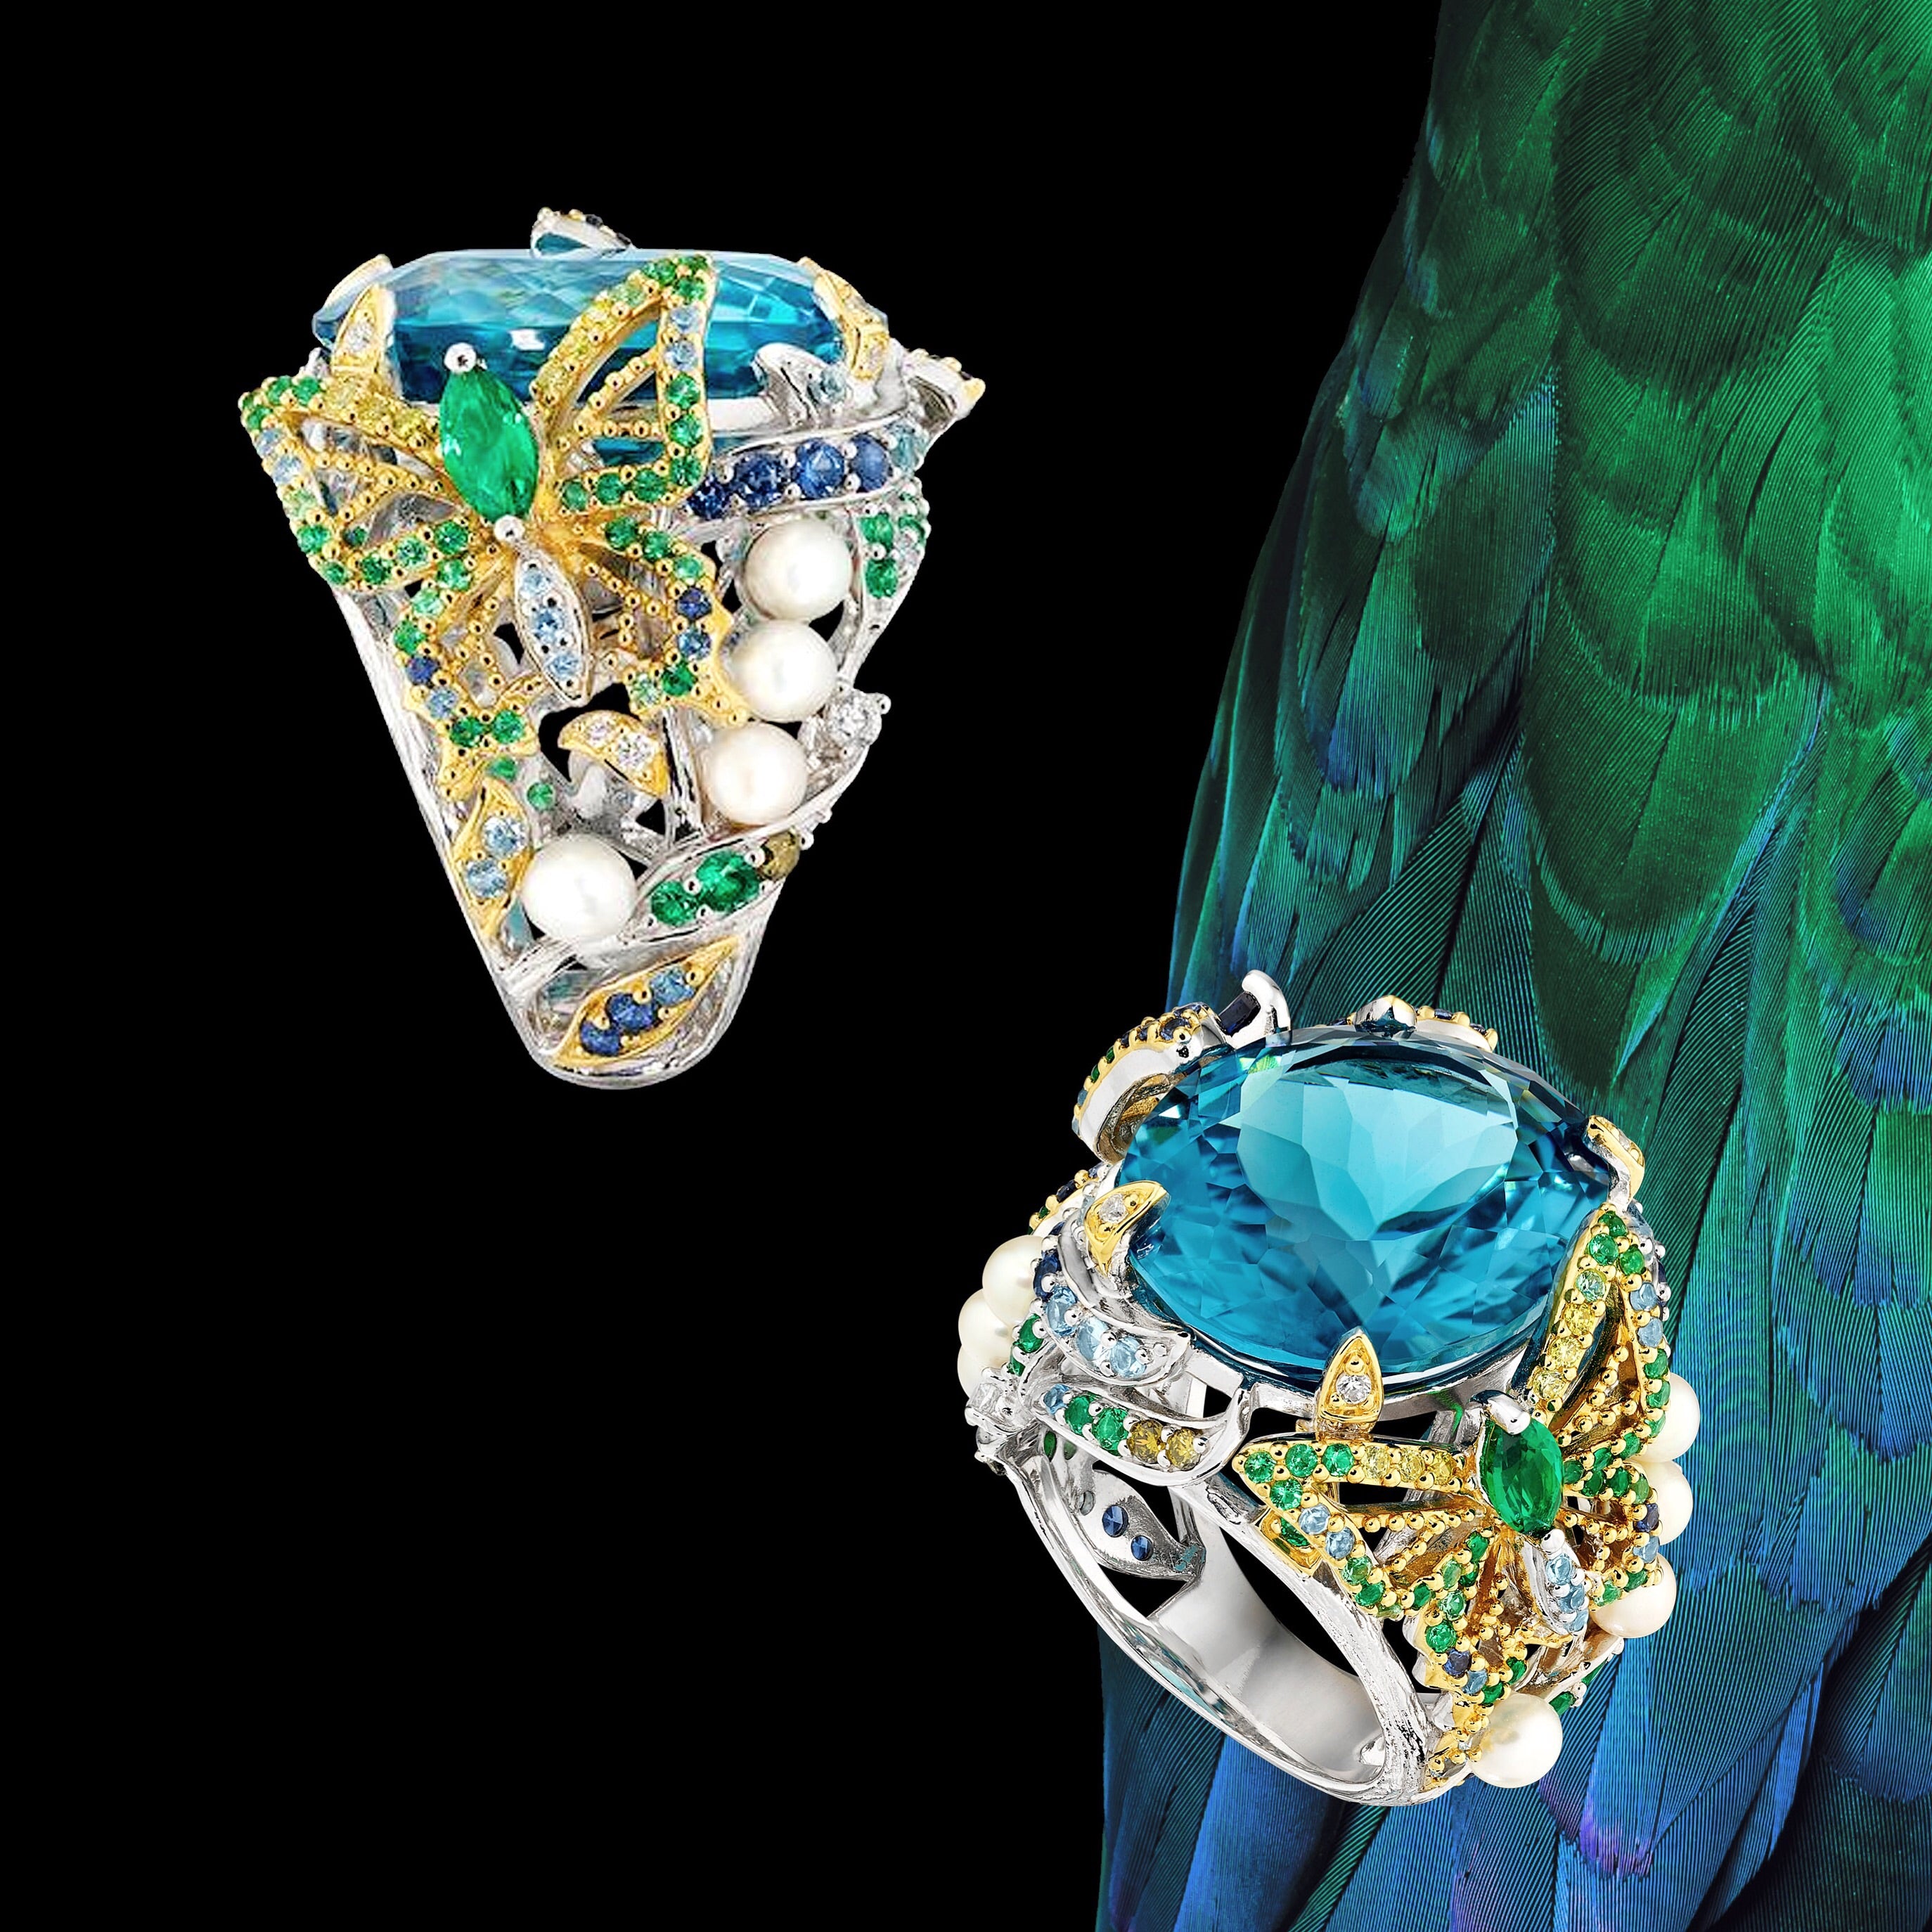 Aqua Swallowtail Ring, Ring, Anabela Chan Joaillerie - Fine jewelry with laboratory grown and created gemstones hand-crafted in the United Kingdom. Anabela Chan Joaillerie is the first fine jewellery brand in the world to champion laboratory-grown and created gemstones with high jewellery design, artisanal craftsmanship and a focus on ethical and sustainable innovations.